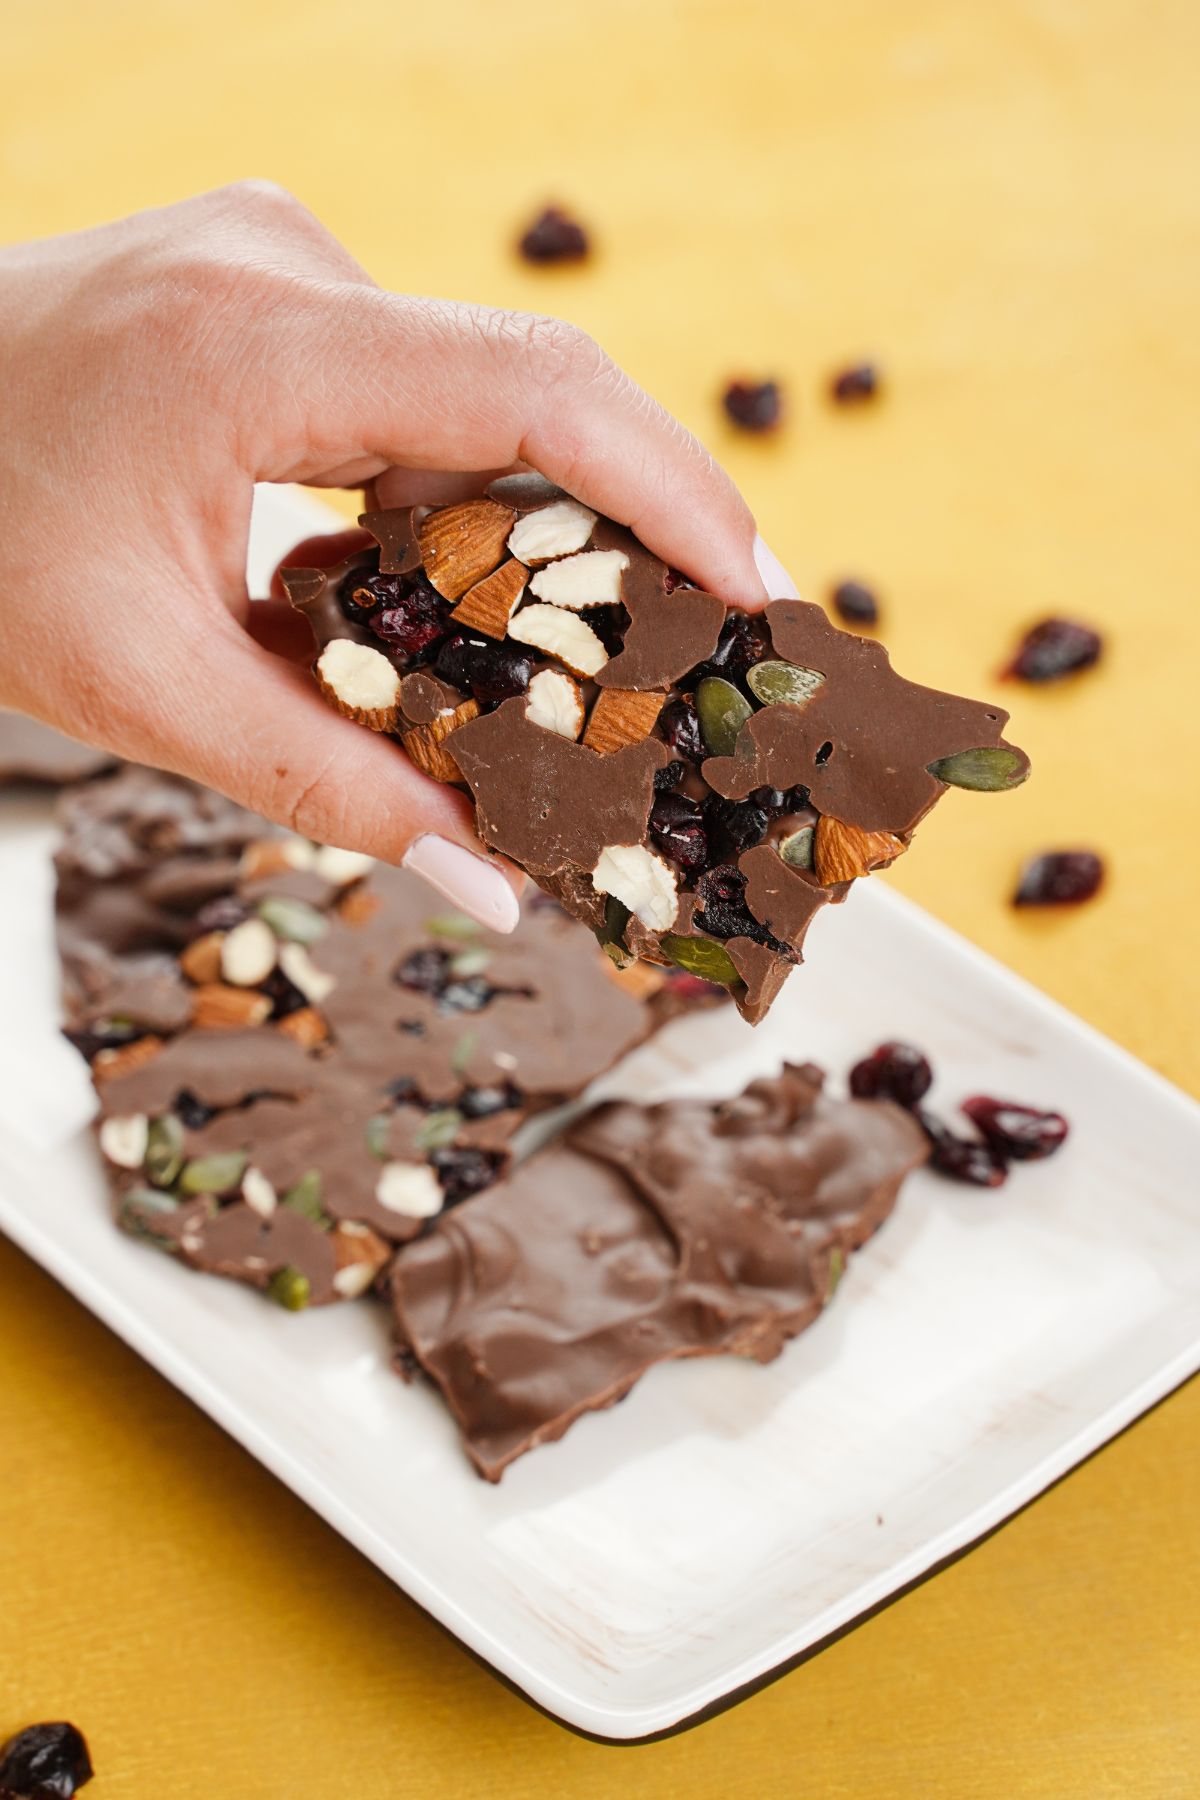 A piece of Nut and Seed Chocolate Bark in hand